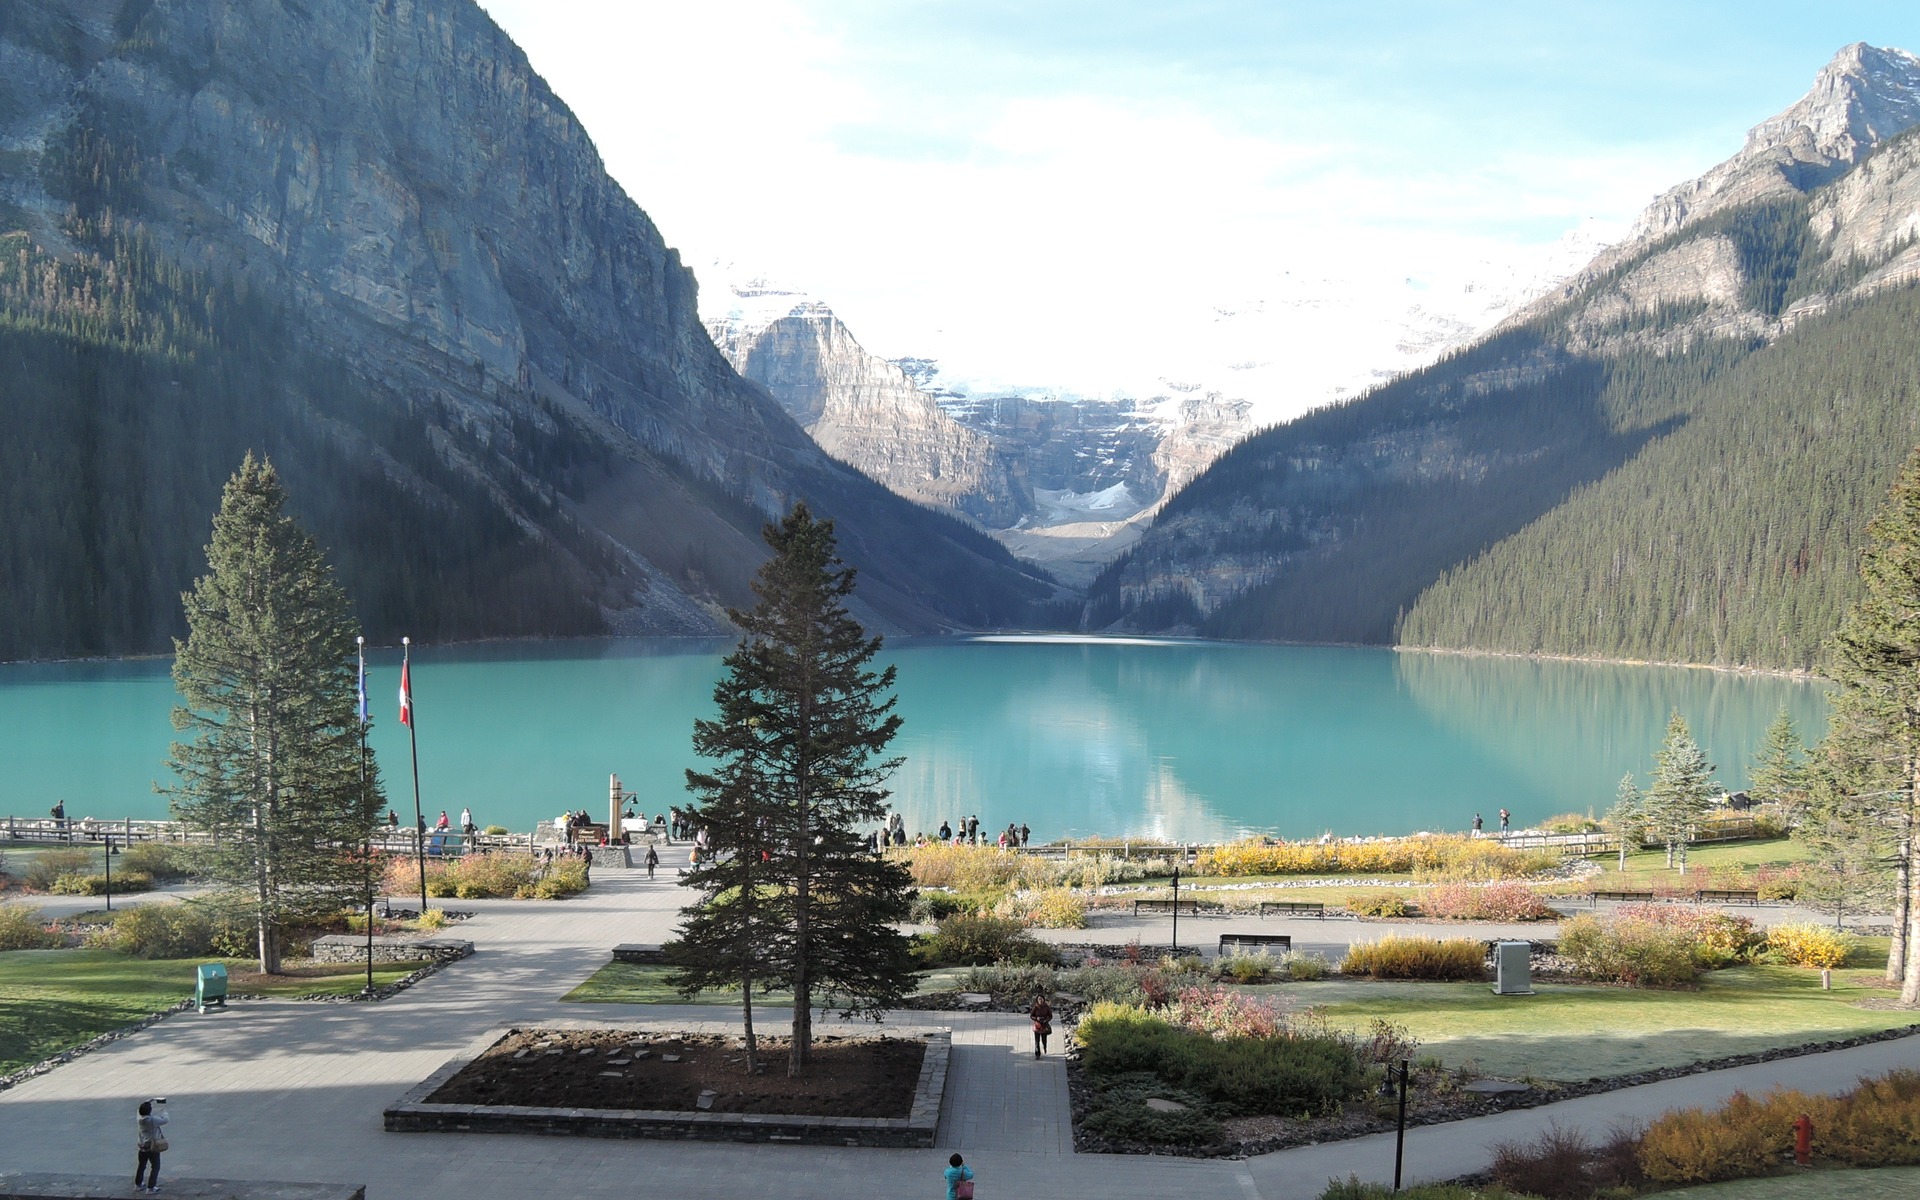 Lake Louise is as charming as ever.